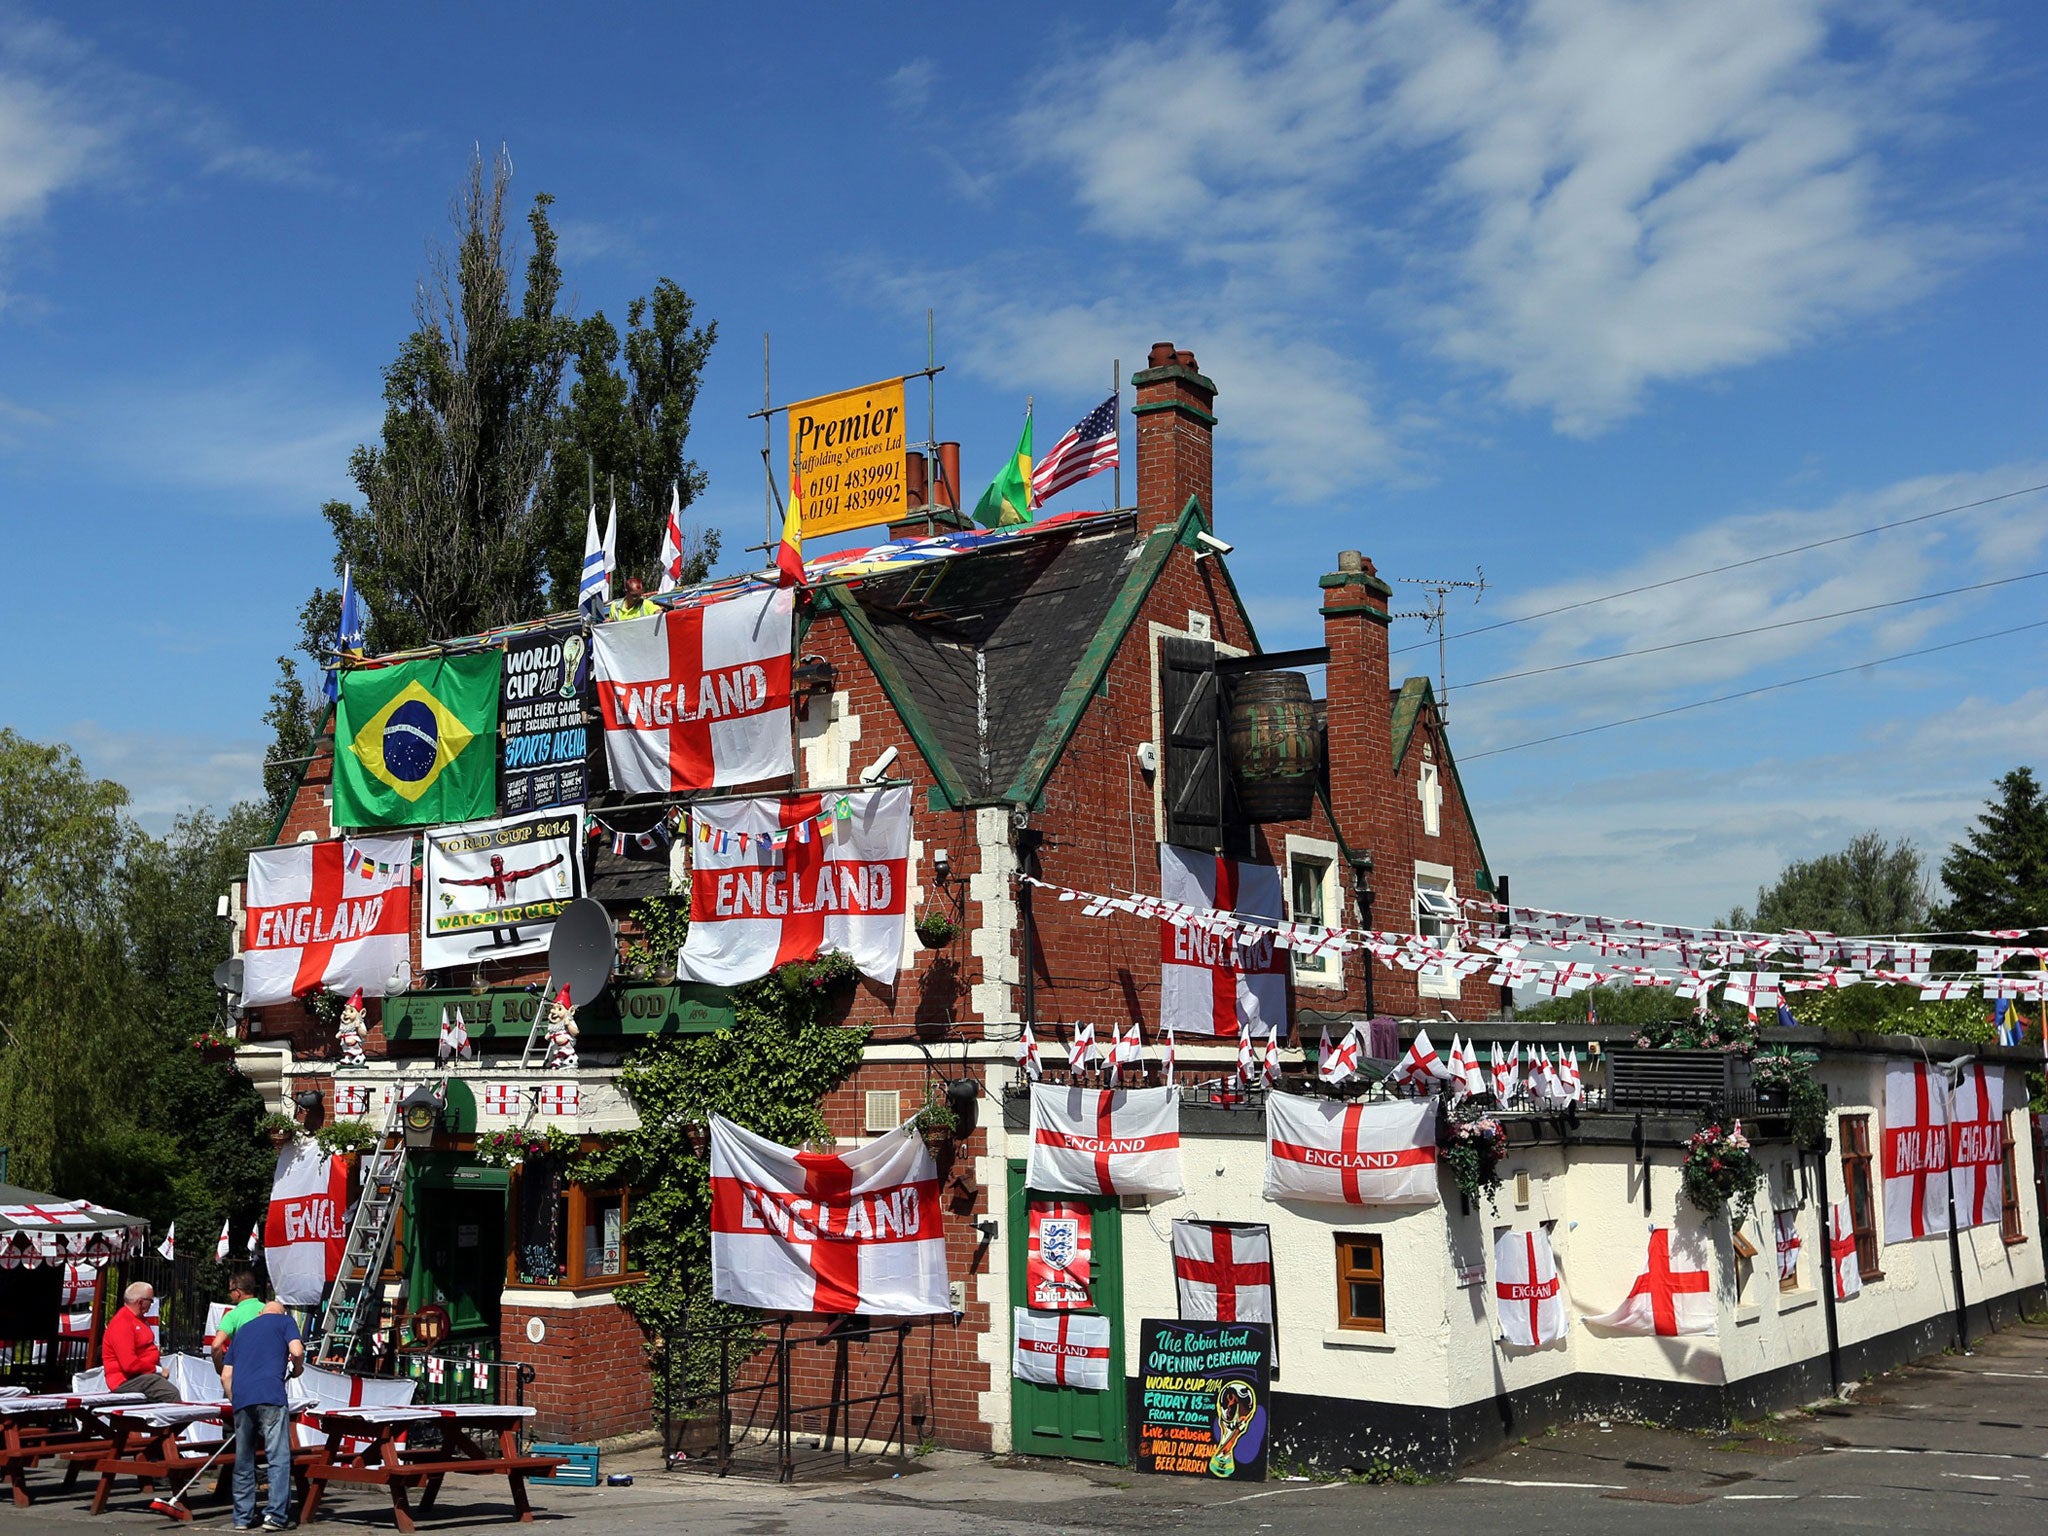 Decorations and flags outside The Robin Hood public house in Jarrow